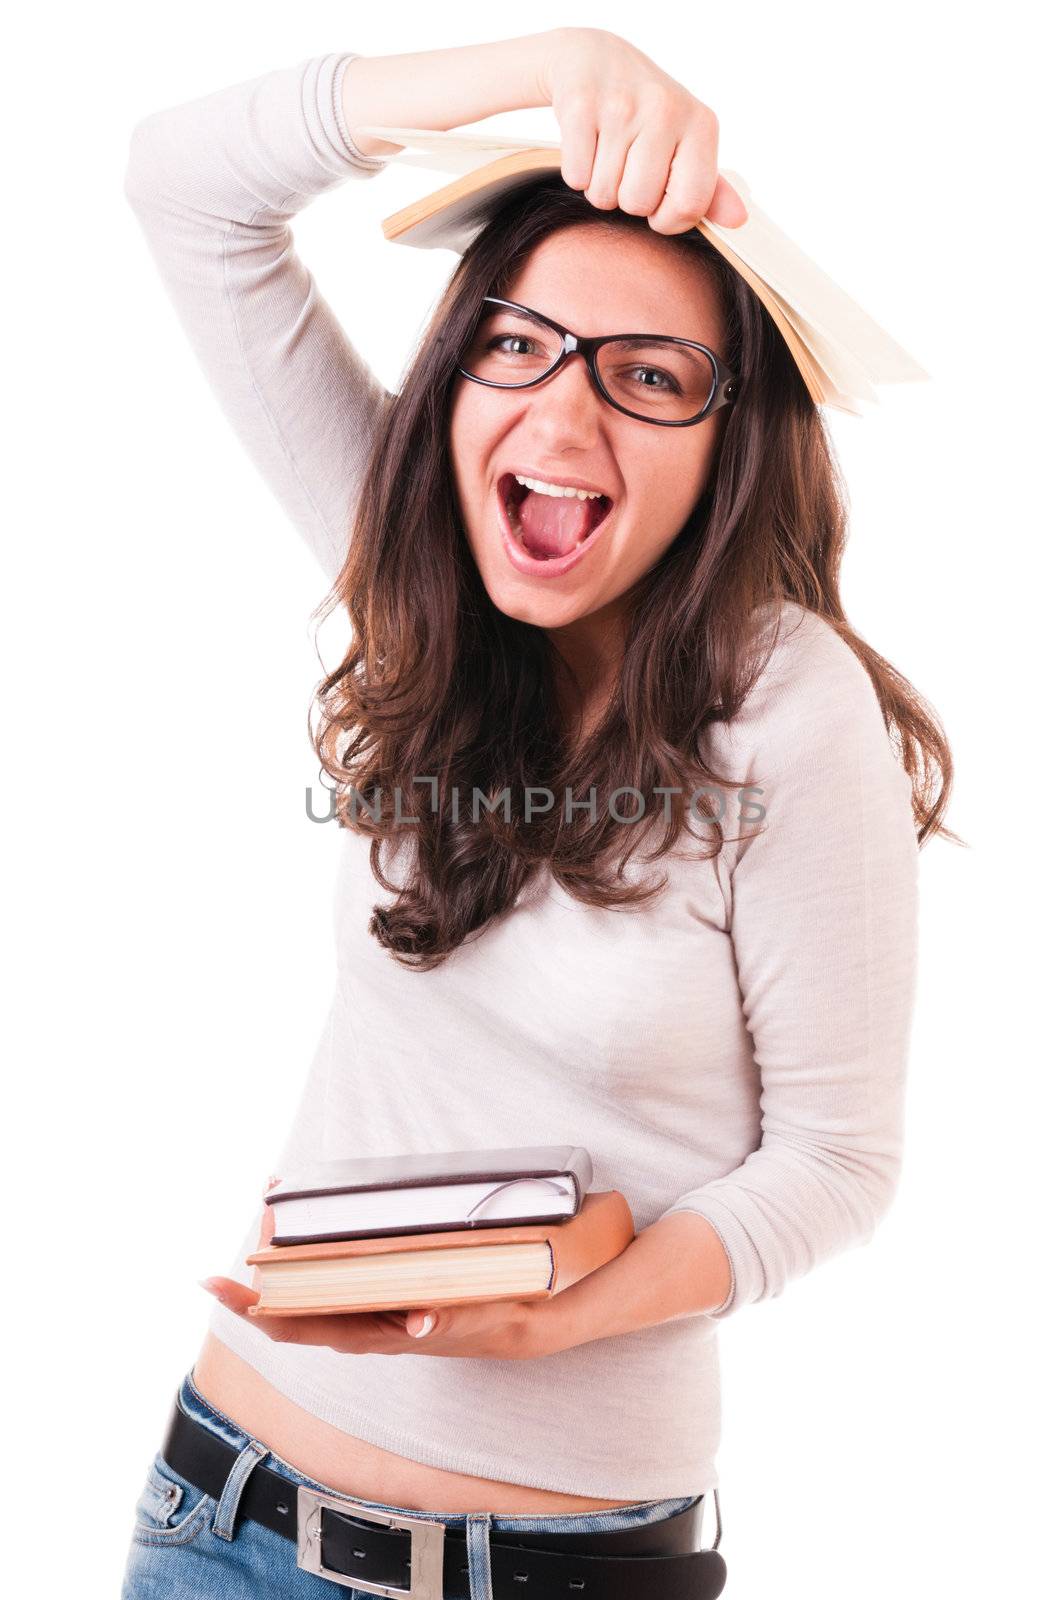 Shouting student with books isolated on white background